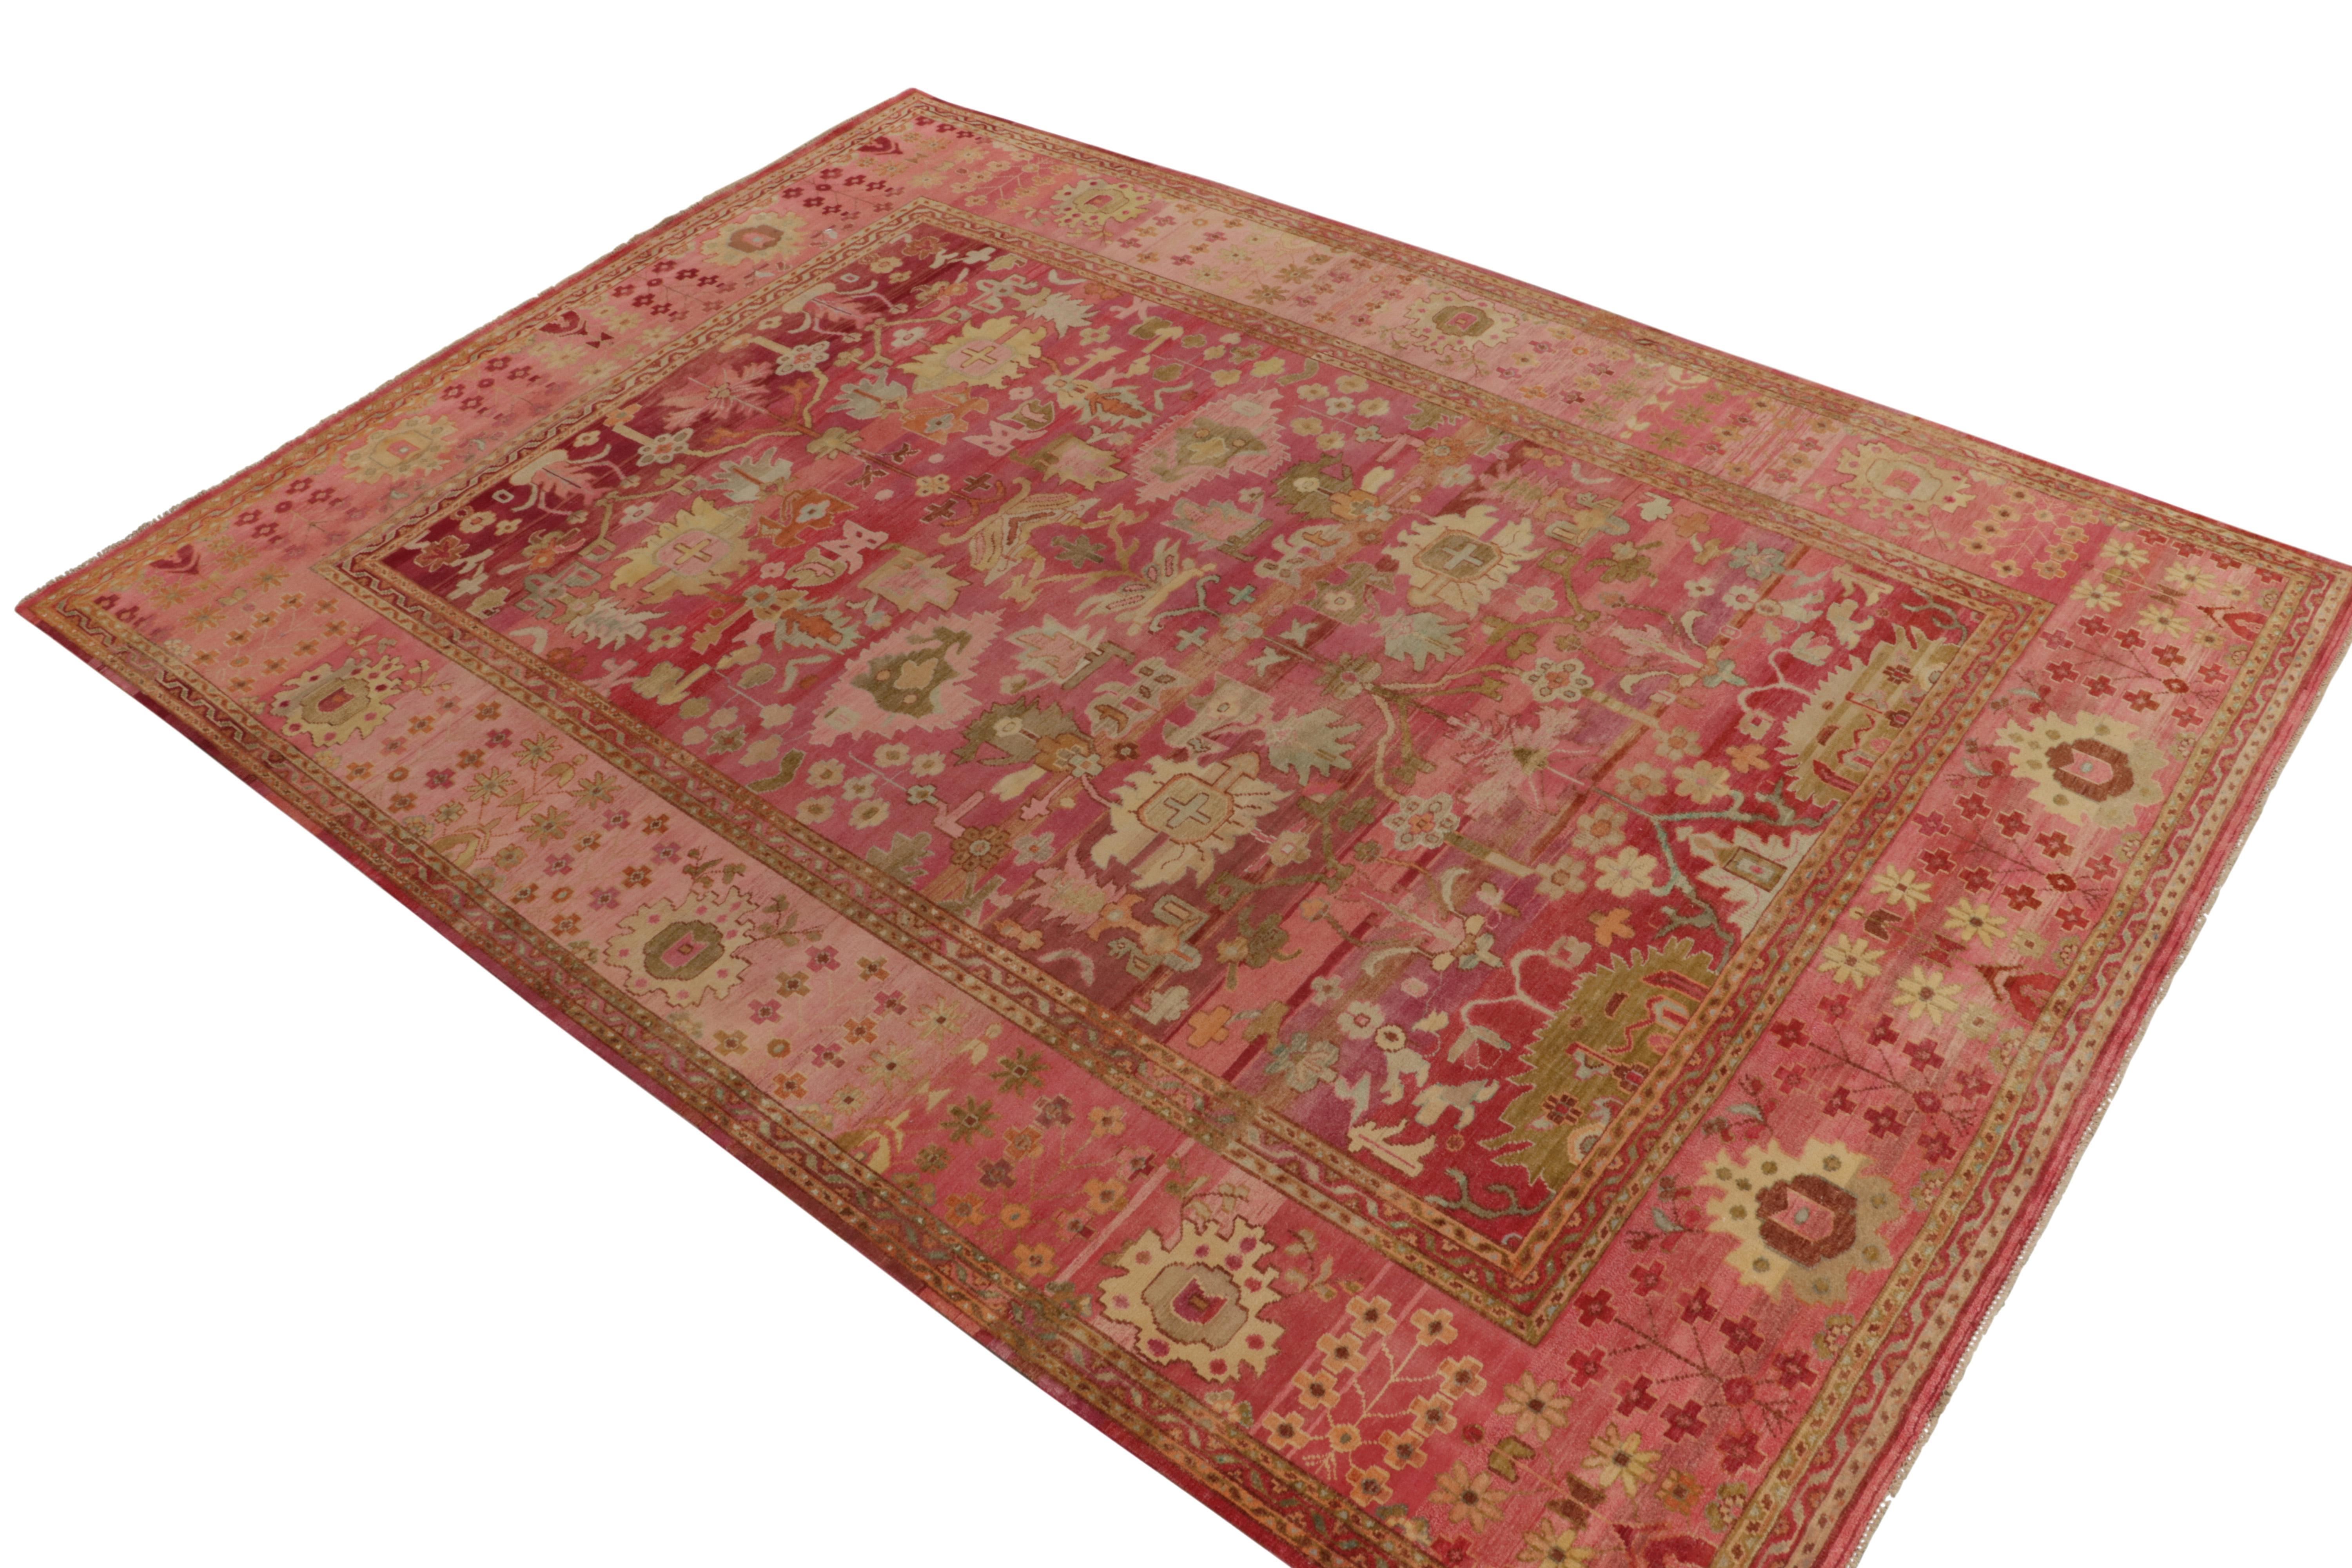 Turkish Rug & Kilim’s Classic Style Silk Rug in Pink, Beige-Brown Floral Pattern For Sale